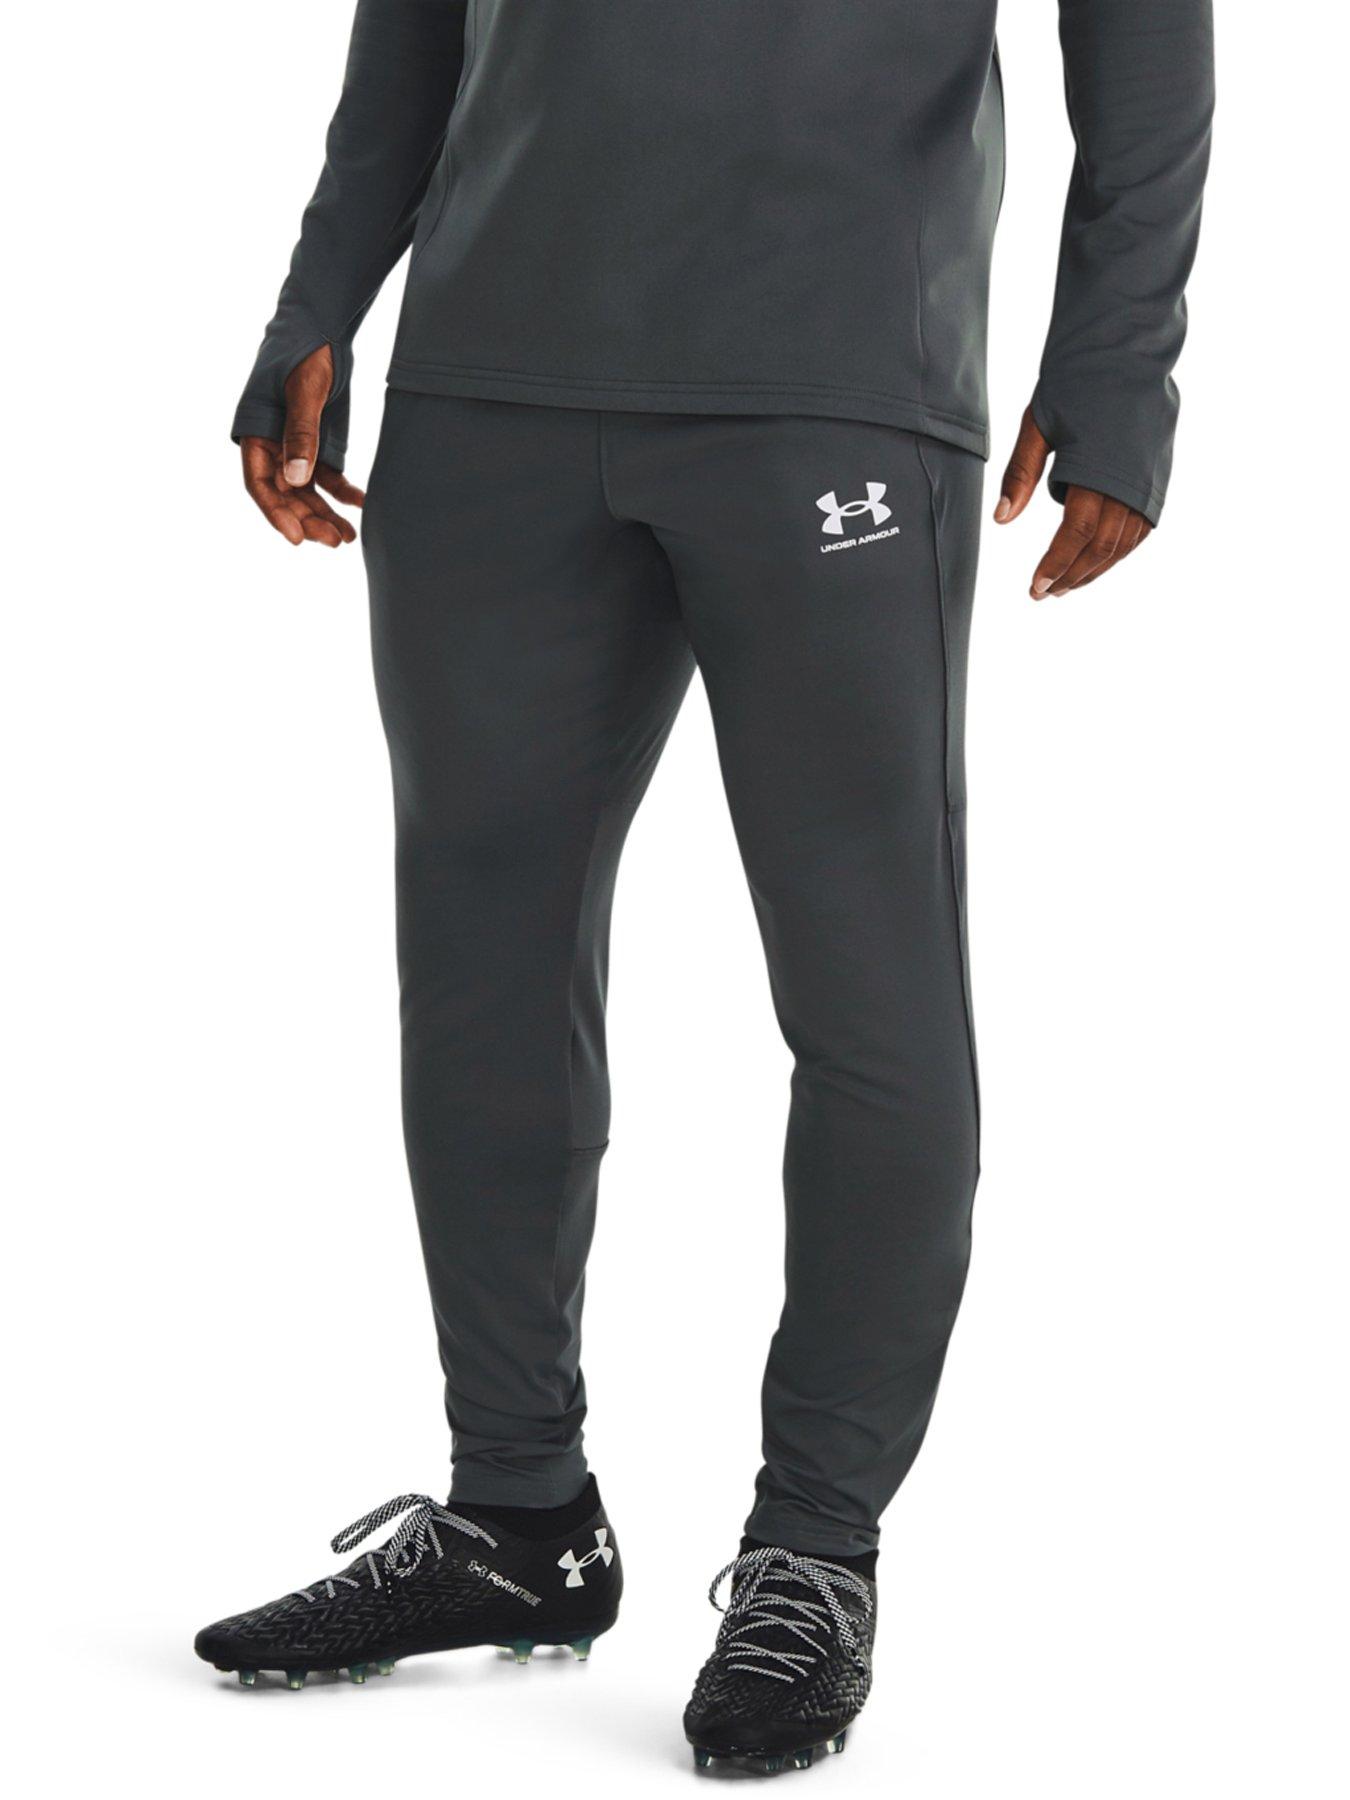 UNDER ARMOUR Challenger Pants - Grey